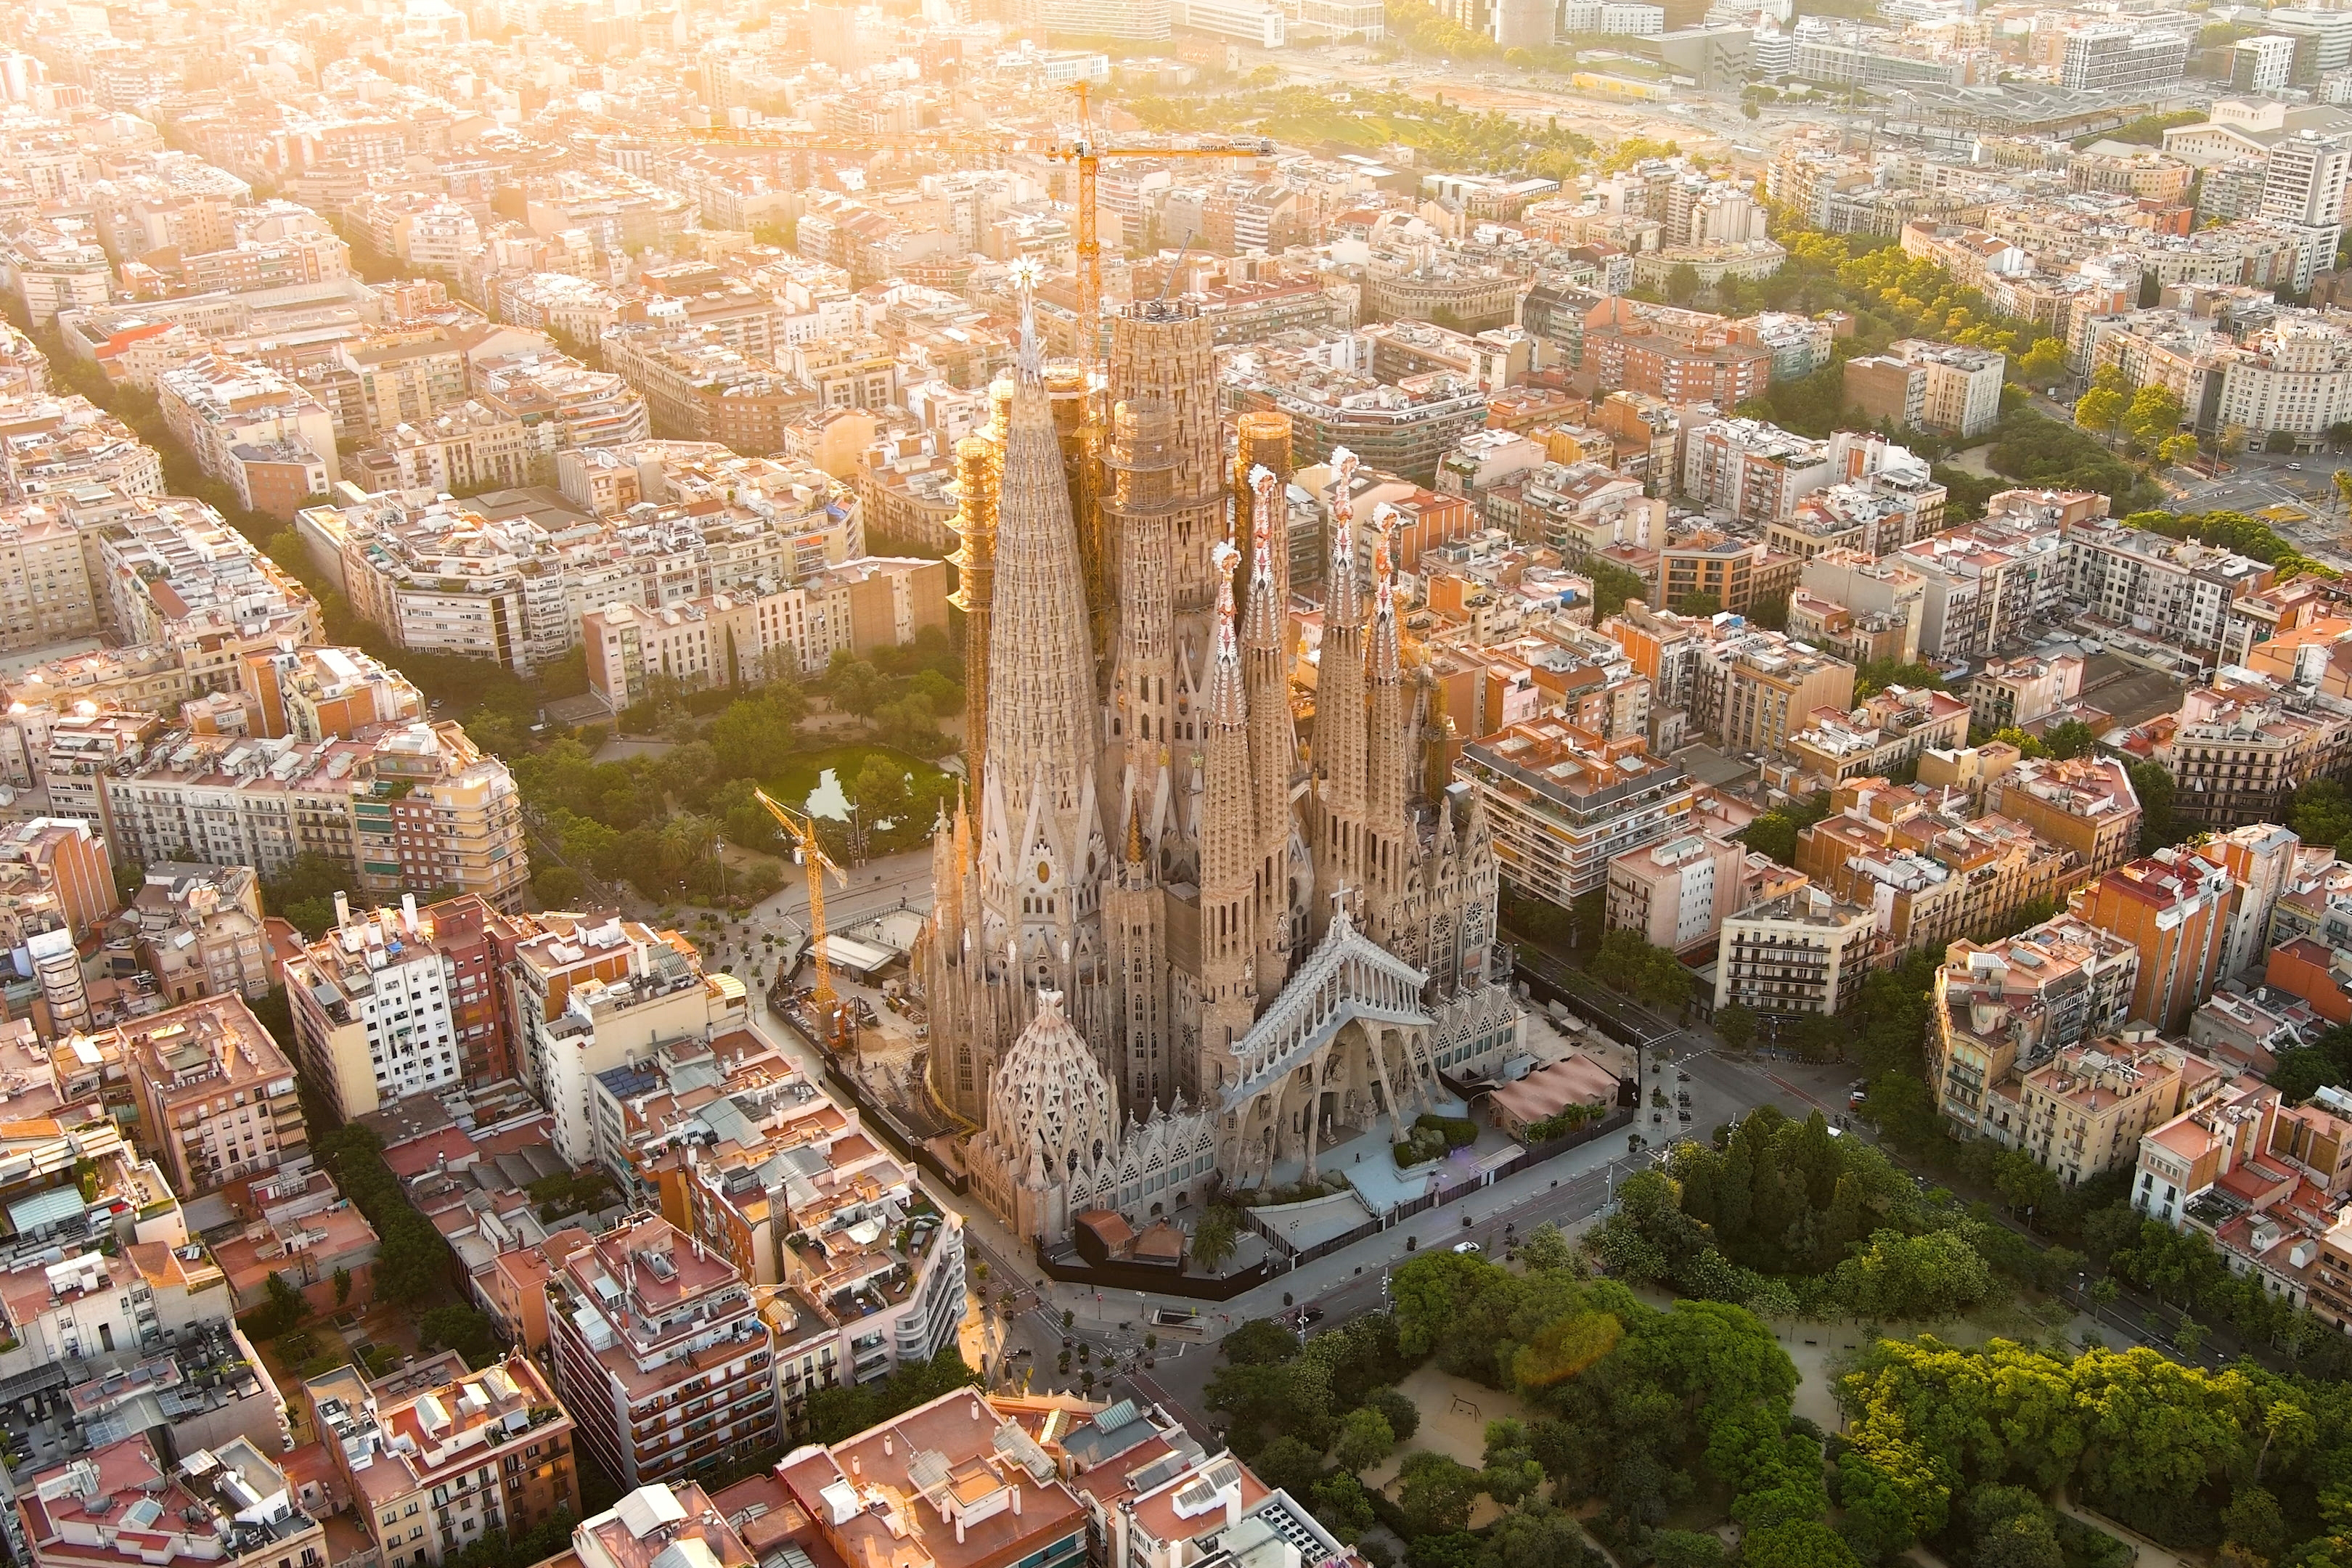 Barcelona is a great city to live in and move to Spain